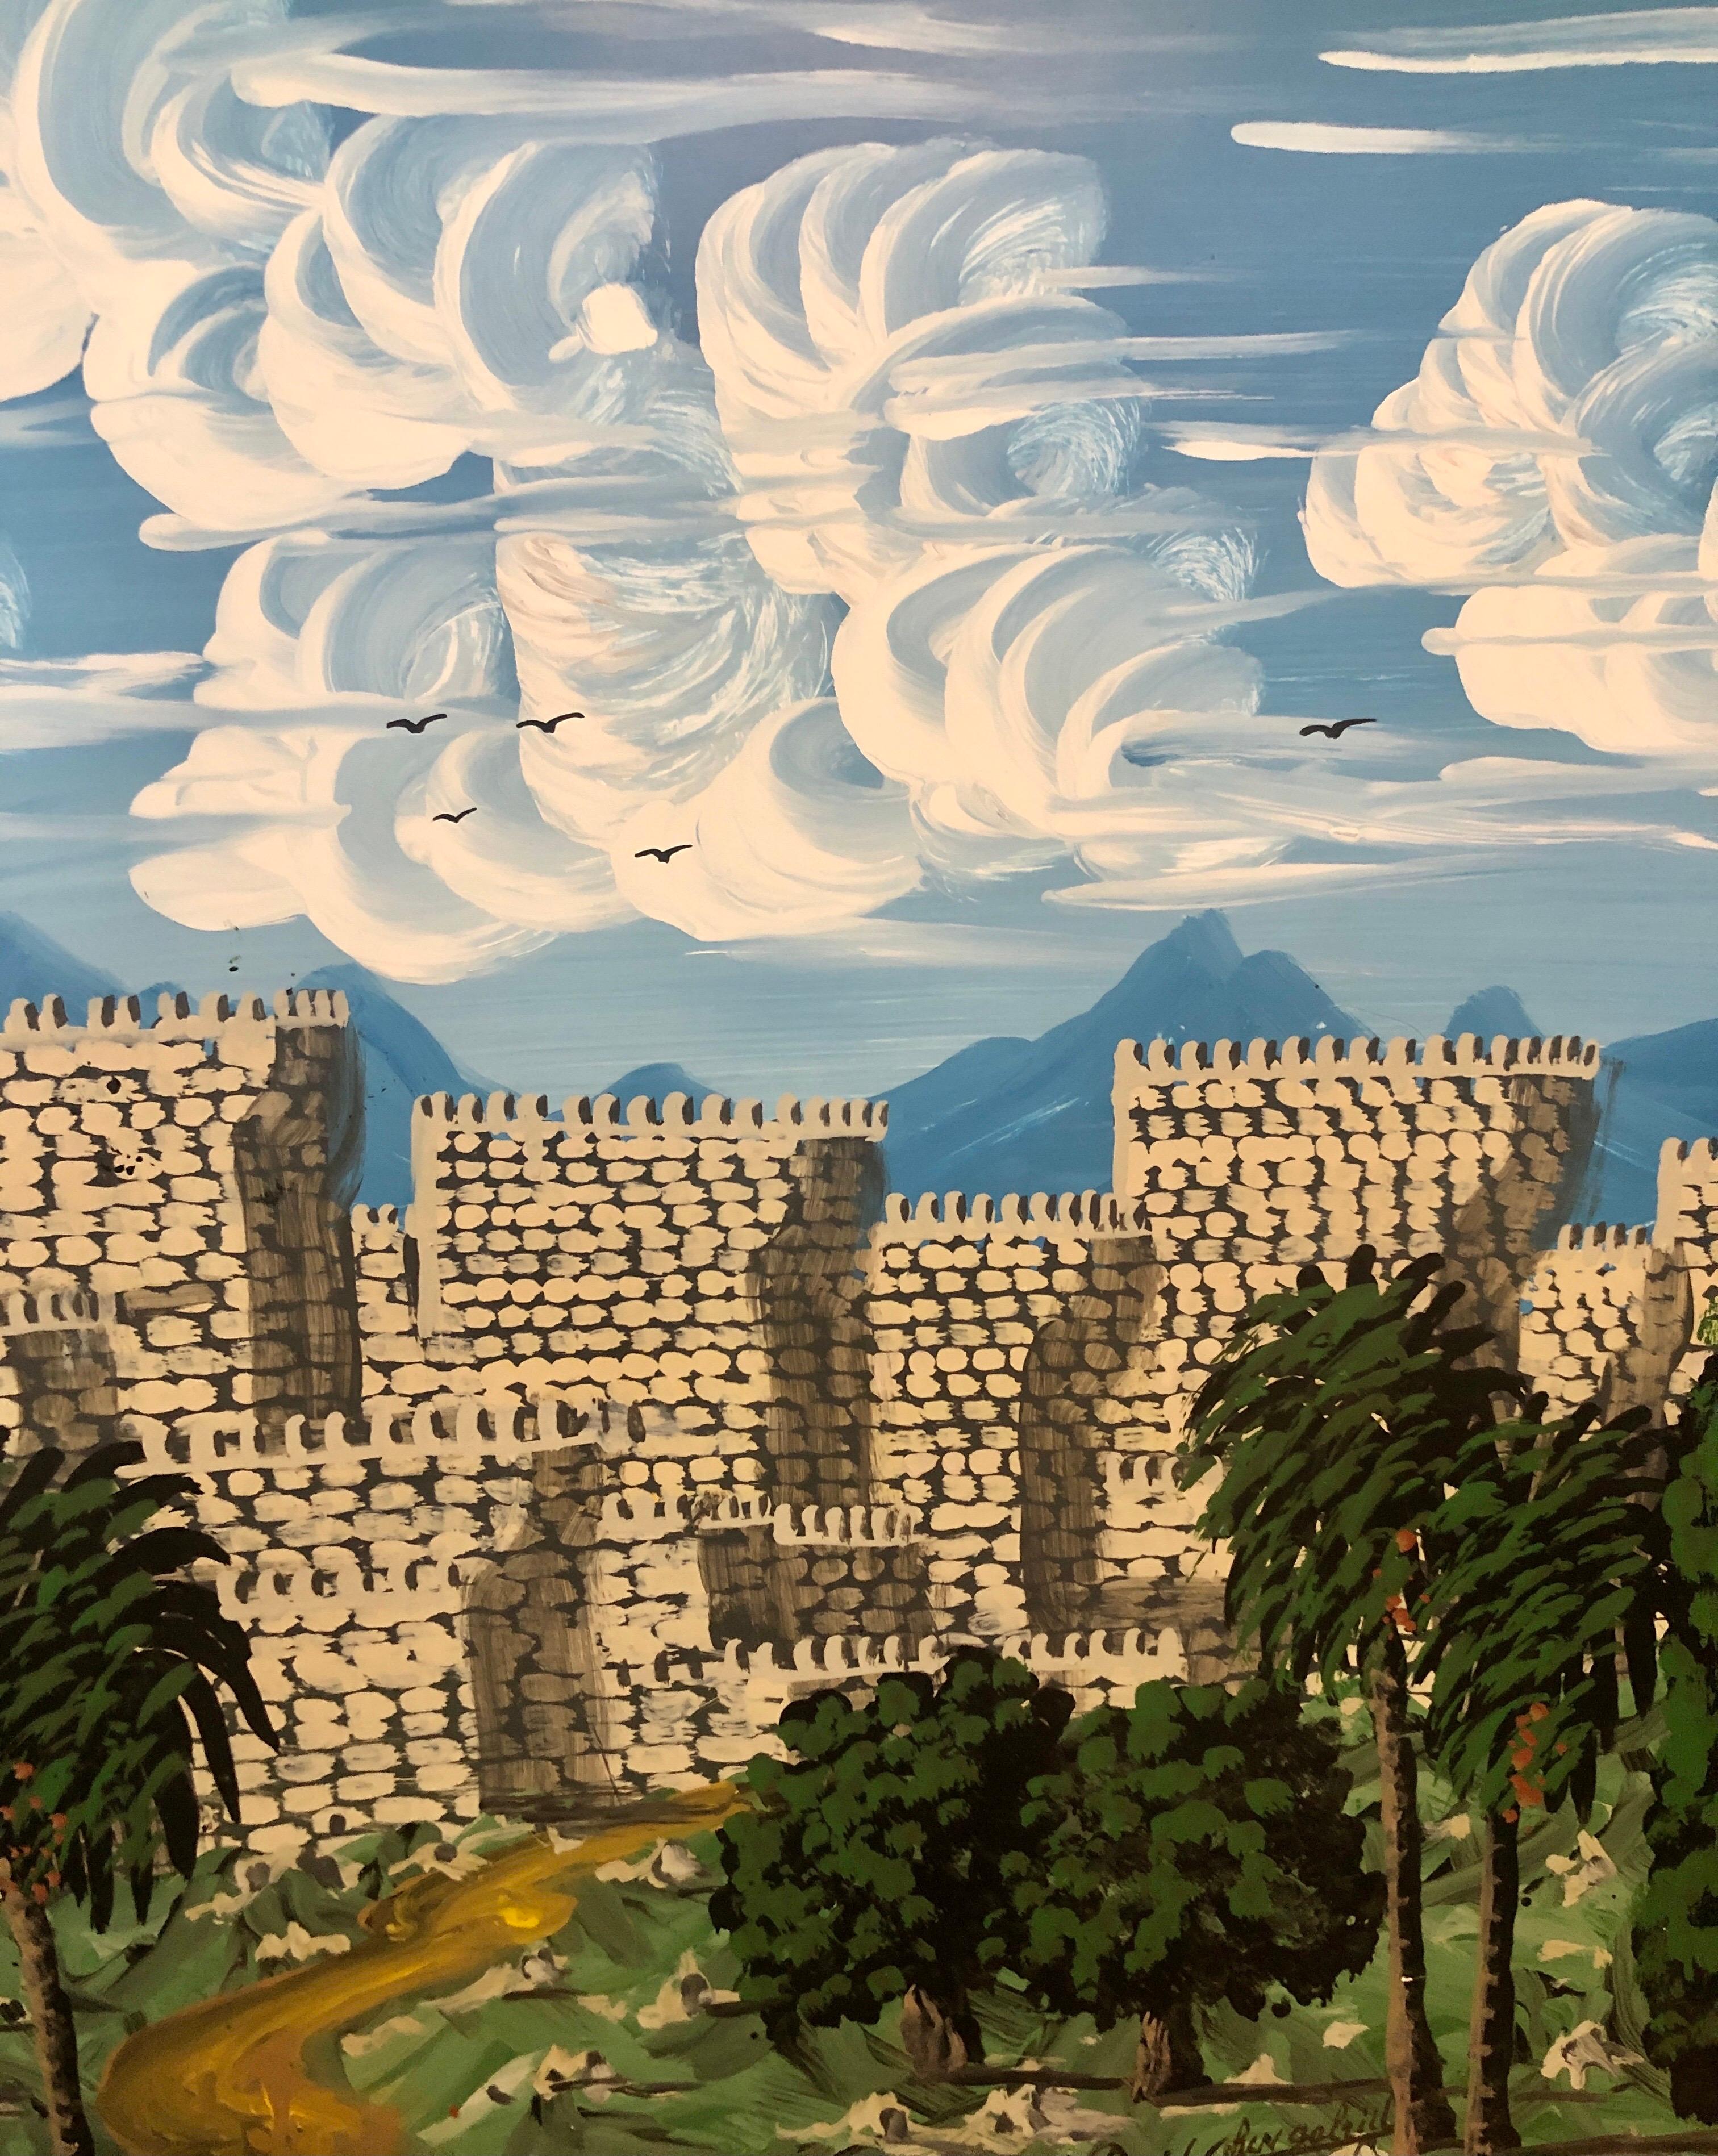 JERUSALEM, Vielle du David, (City of David) Superlac (enamel) painting on paper, hand signed, titled and dated. 
Provenance: Michael Hittleman Gallery Los Angeles. 

Gabriel Cohen, (French-Israeli) Self taught, Naive painter was born in Paris in